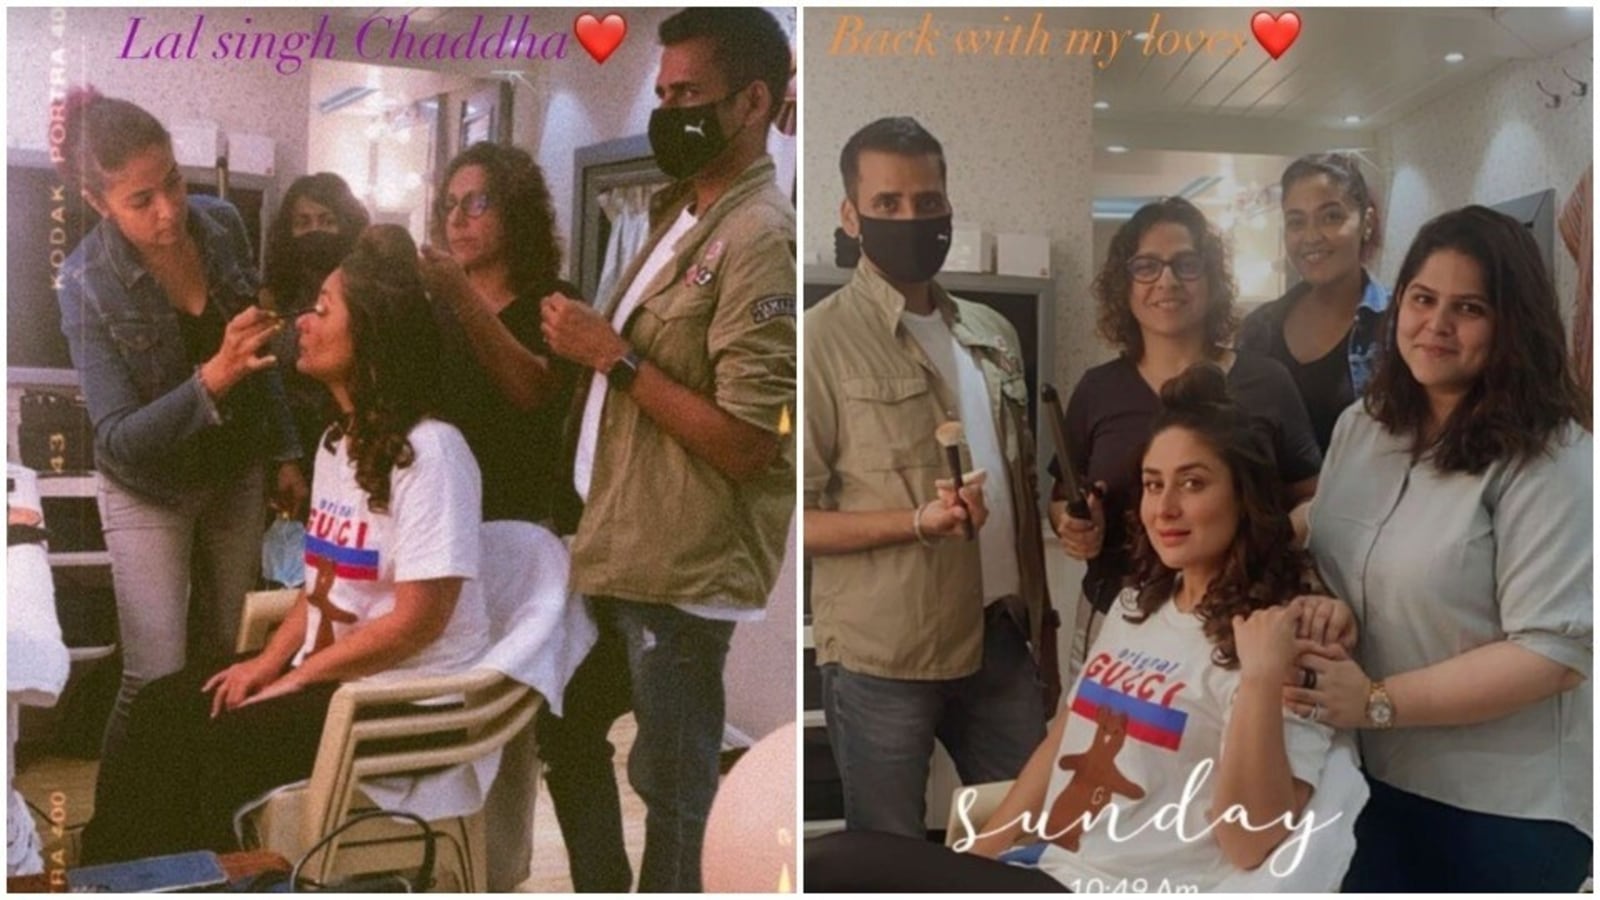 Kareena Kapoor returns to Laal Singh Chaddha sets, shares pics with her  team: 'Back with my loves' | Bollywood - Hindustan Times